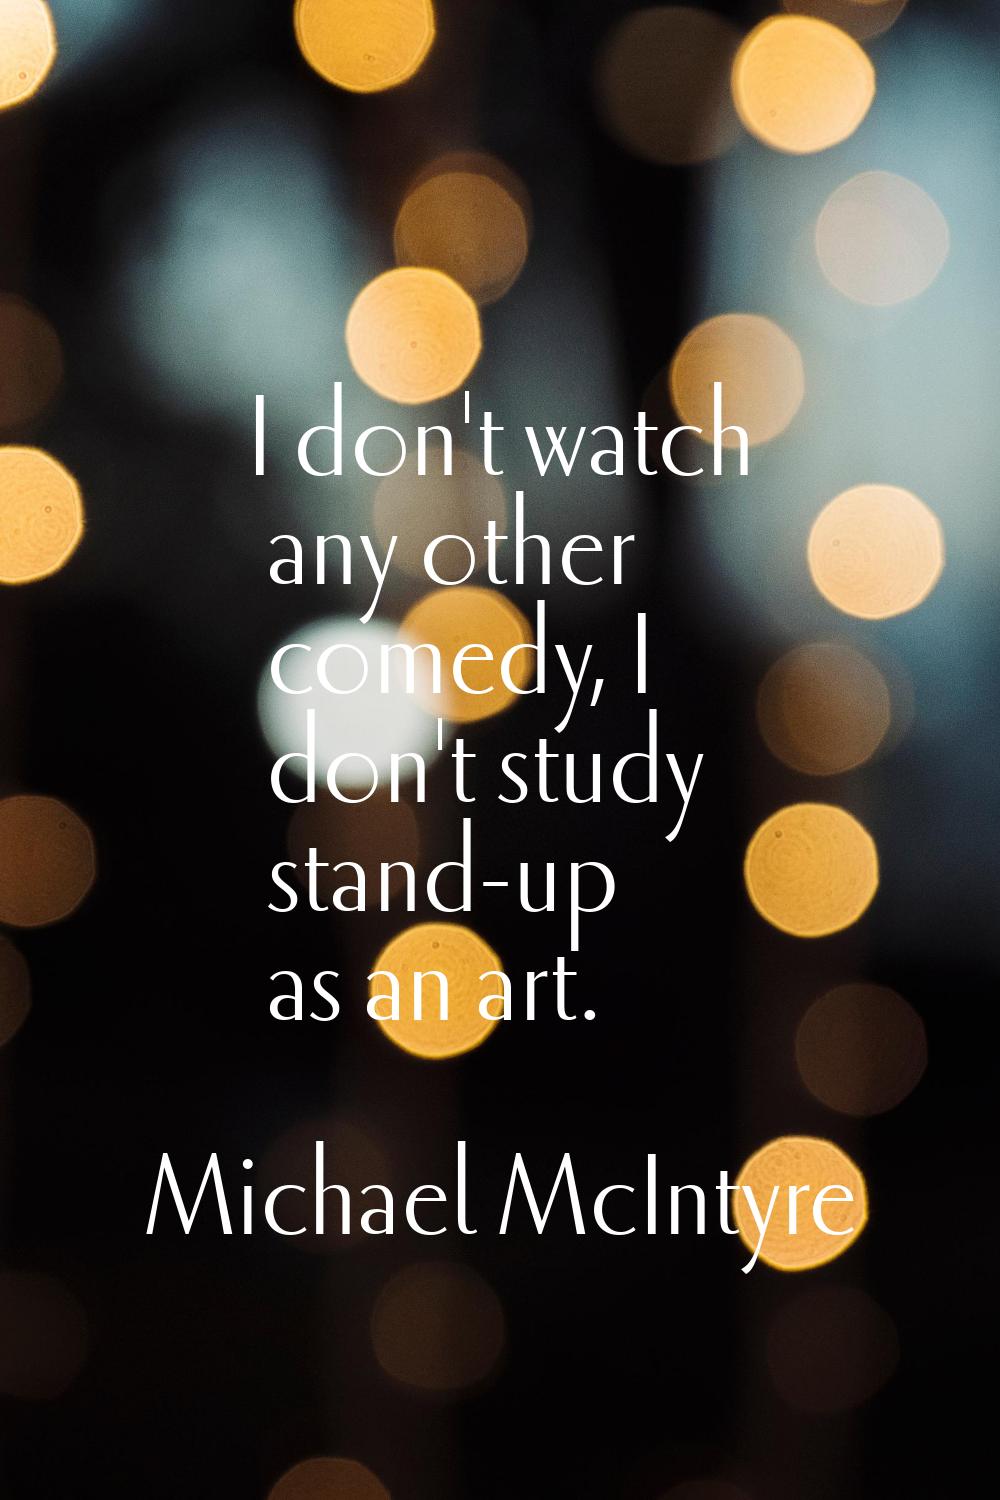 I don't watch any other comedy, I don't study stand-up as an art.